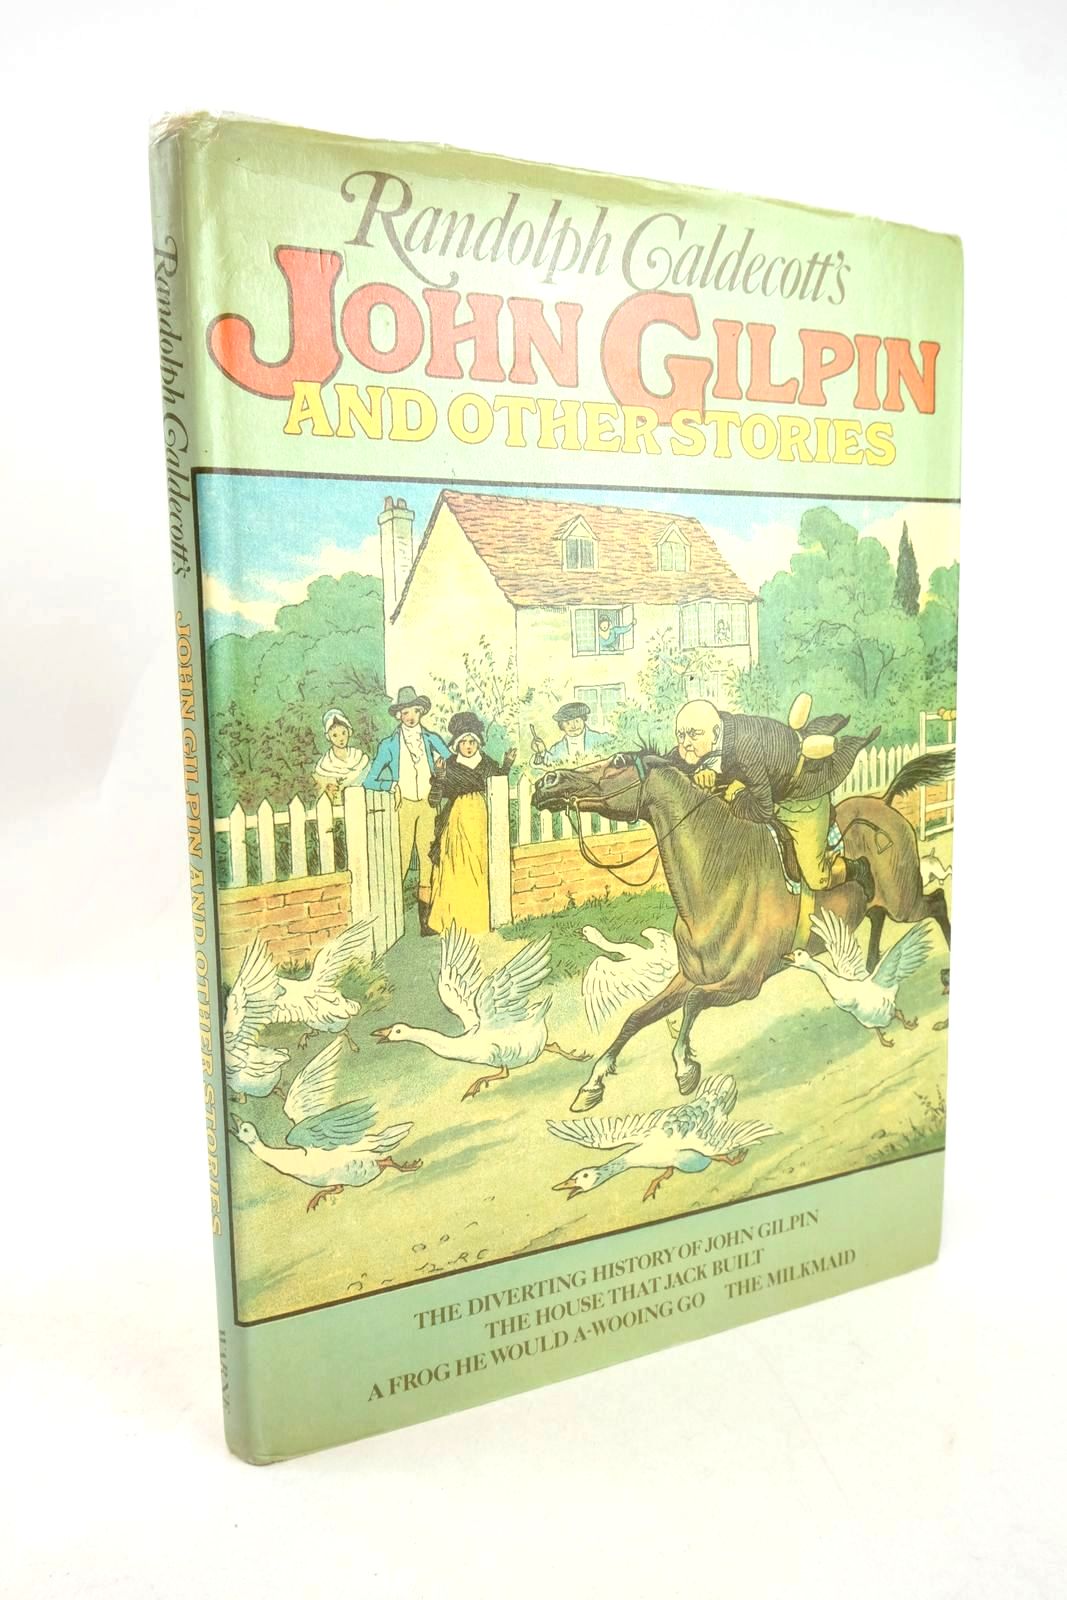 Photo of RANDOLPH CALDECOTT'S JOHN GILPIN AND OTHER STORIES- Stock Number: 1327764